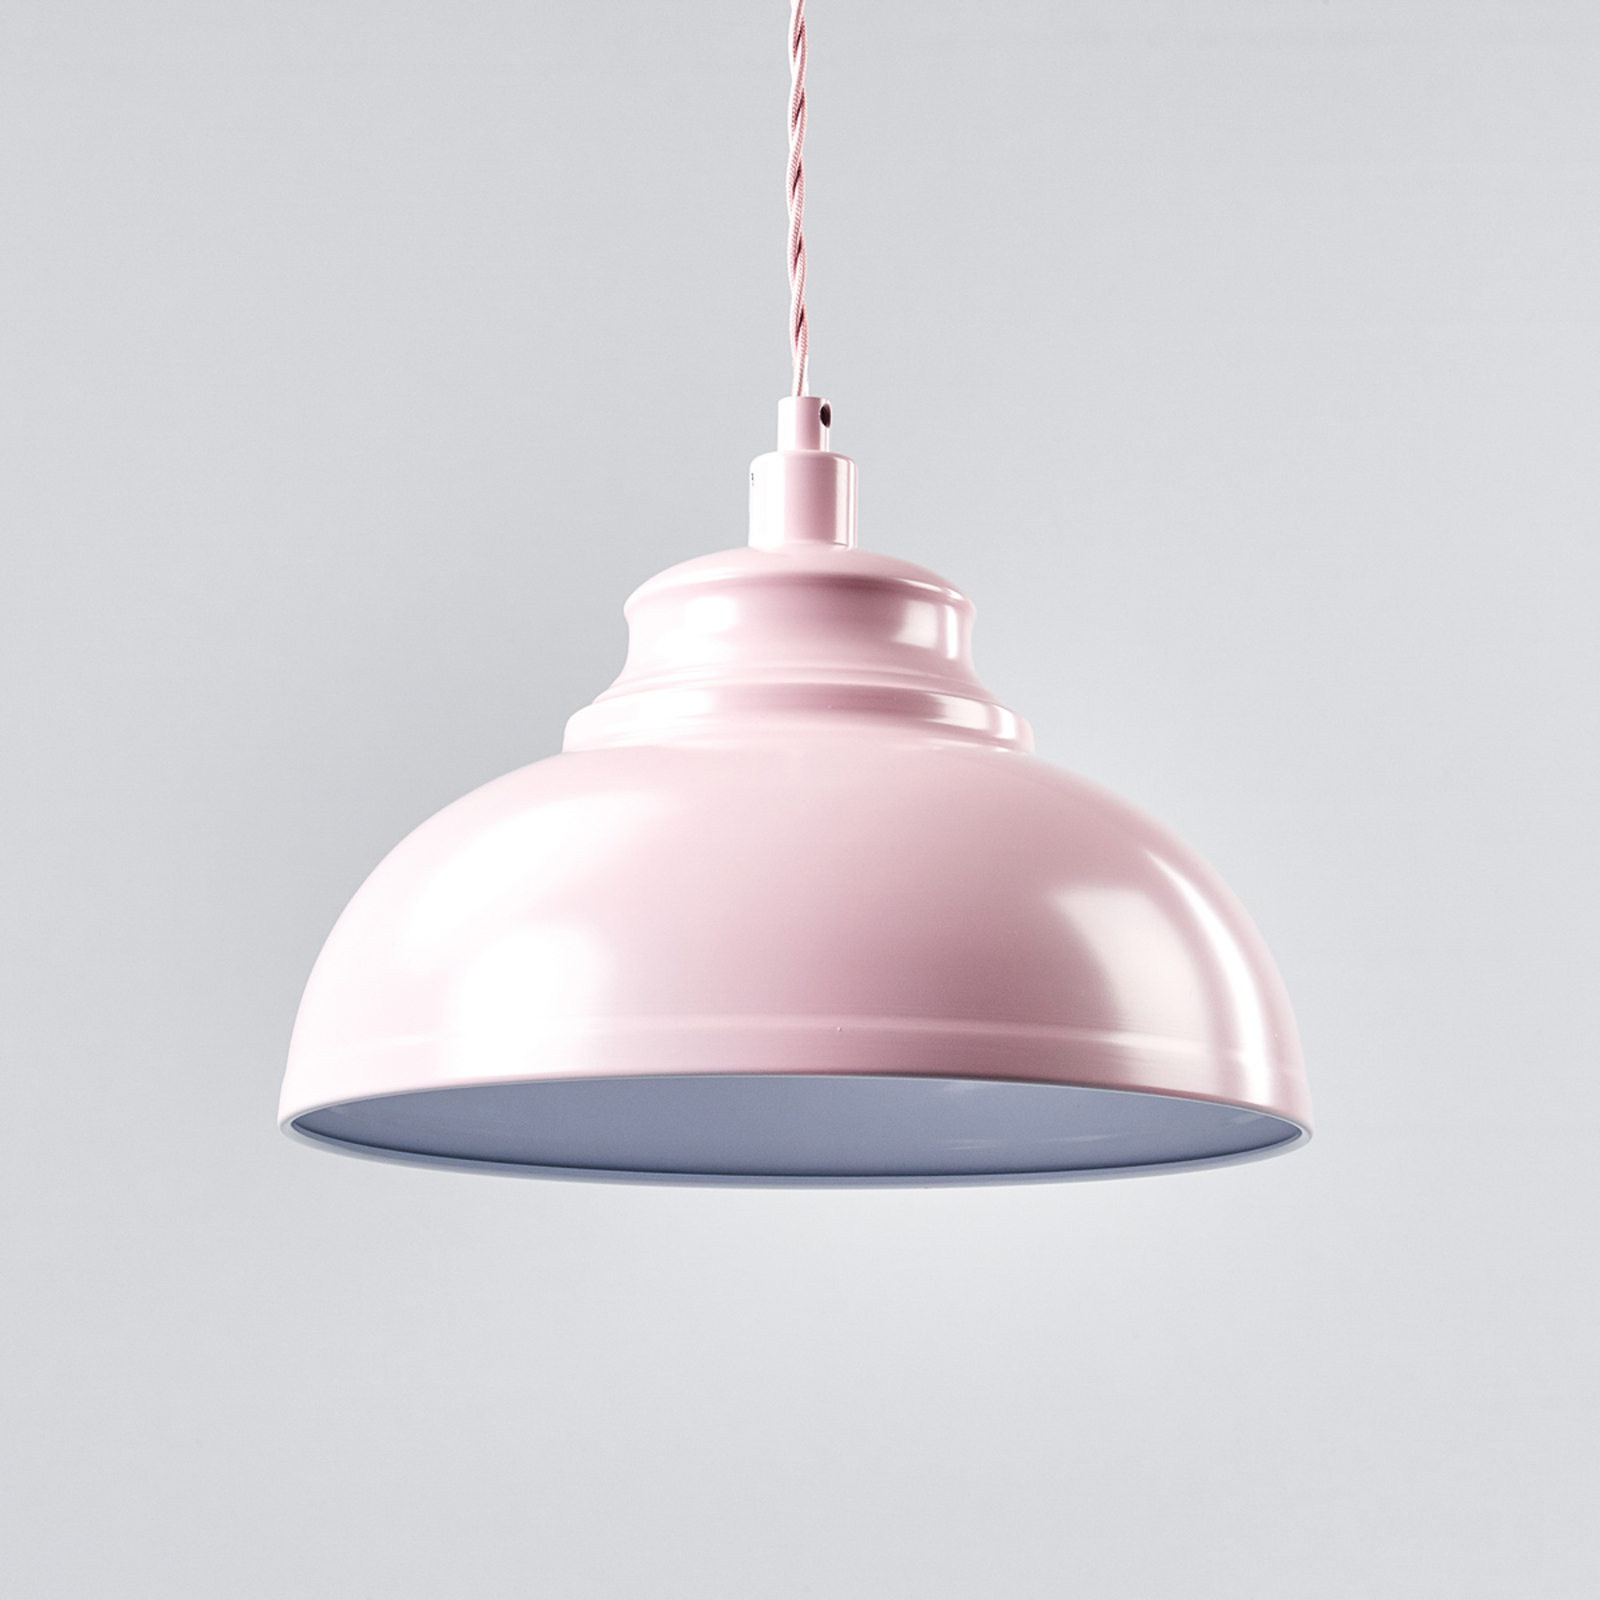 Isla pendant light with metal shade in rosé